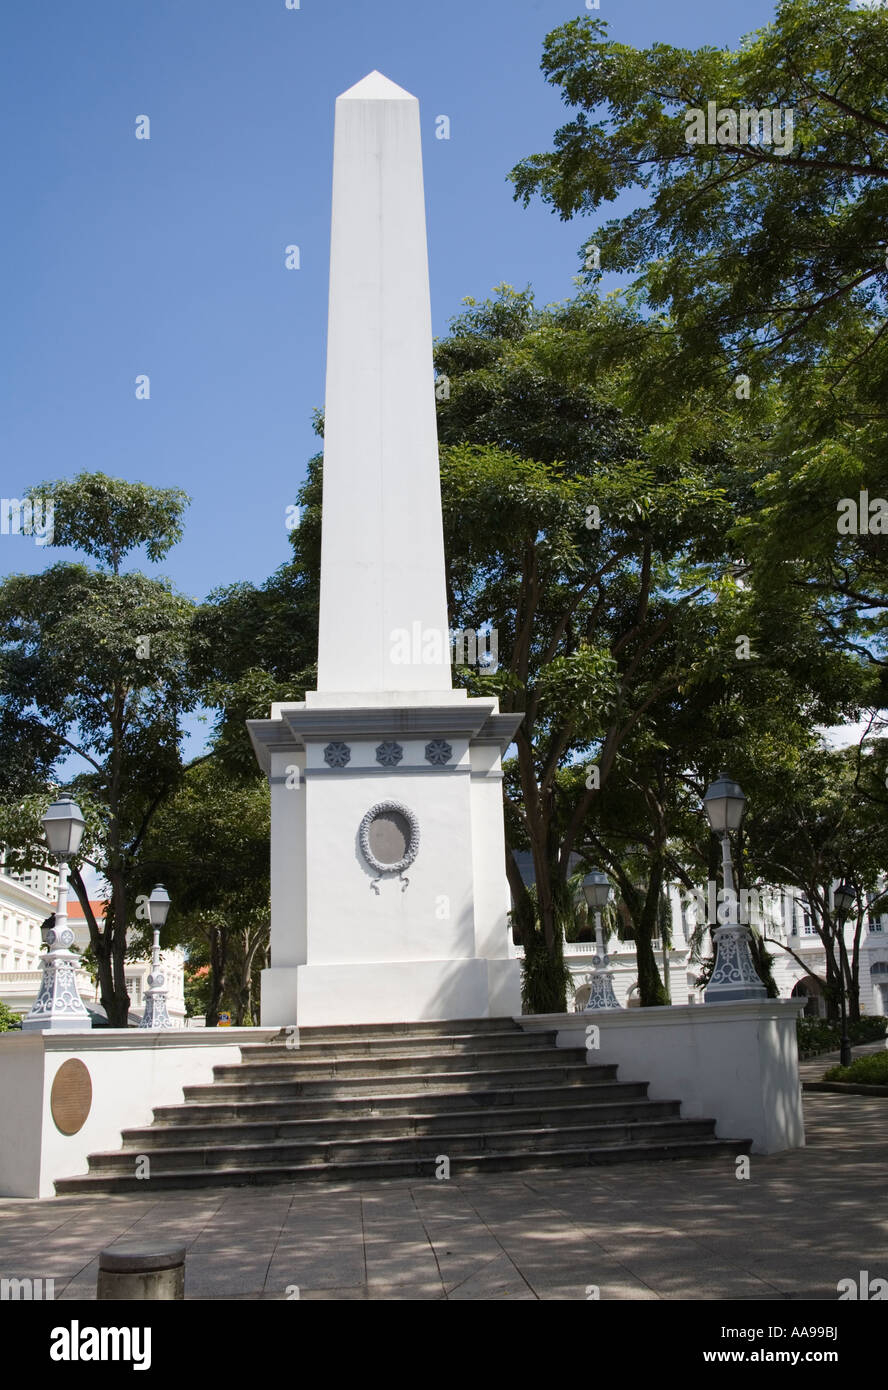 SINGAPORE ASIA May Dalhousie obelisk built to commemorate the visit of the Governor General of India Lord Dalhousie in 1850 Stock Photo